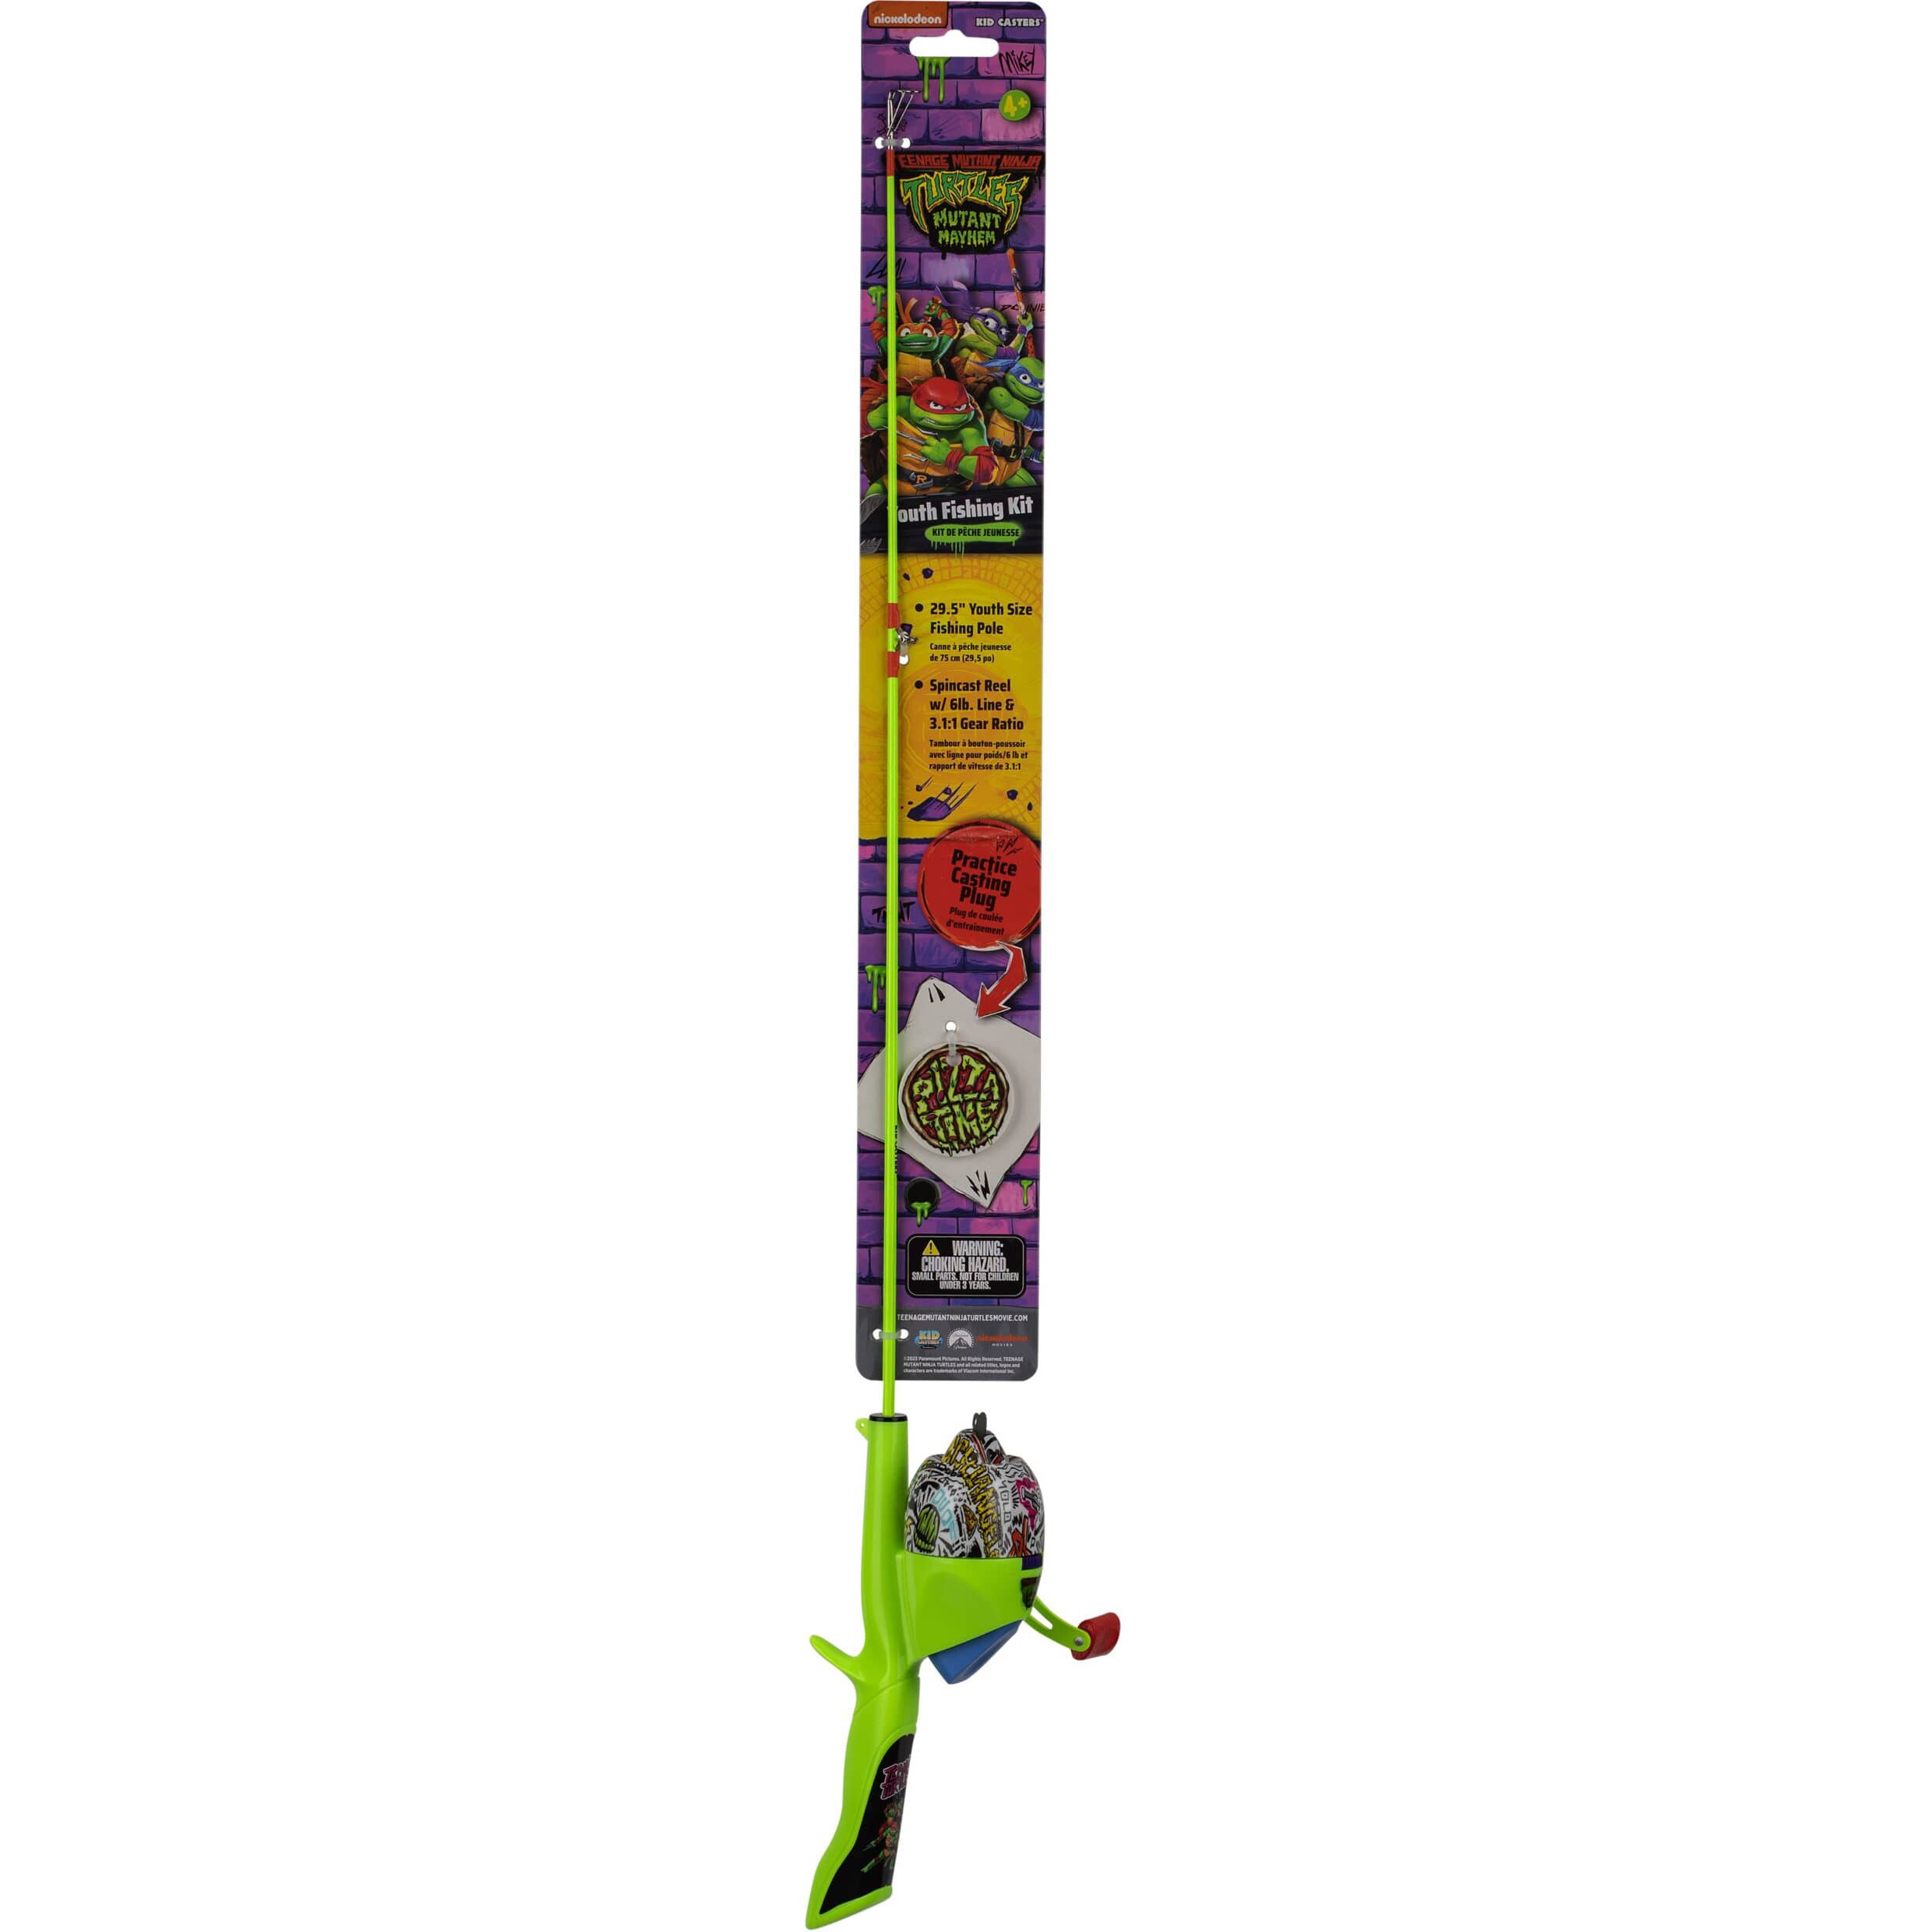 Kid Casters Nickelodeon Paw Patrol Telescopic Rod and Reel Combo